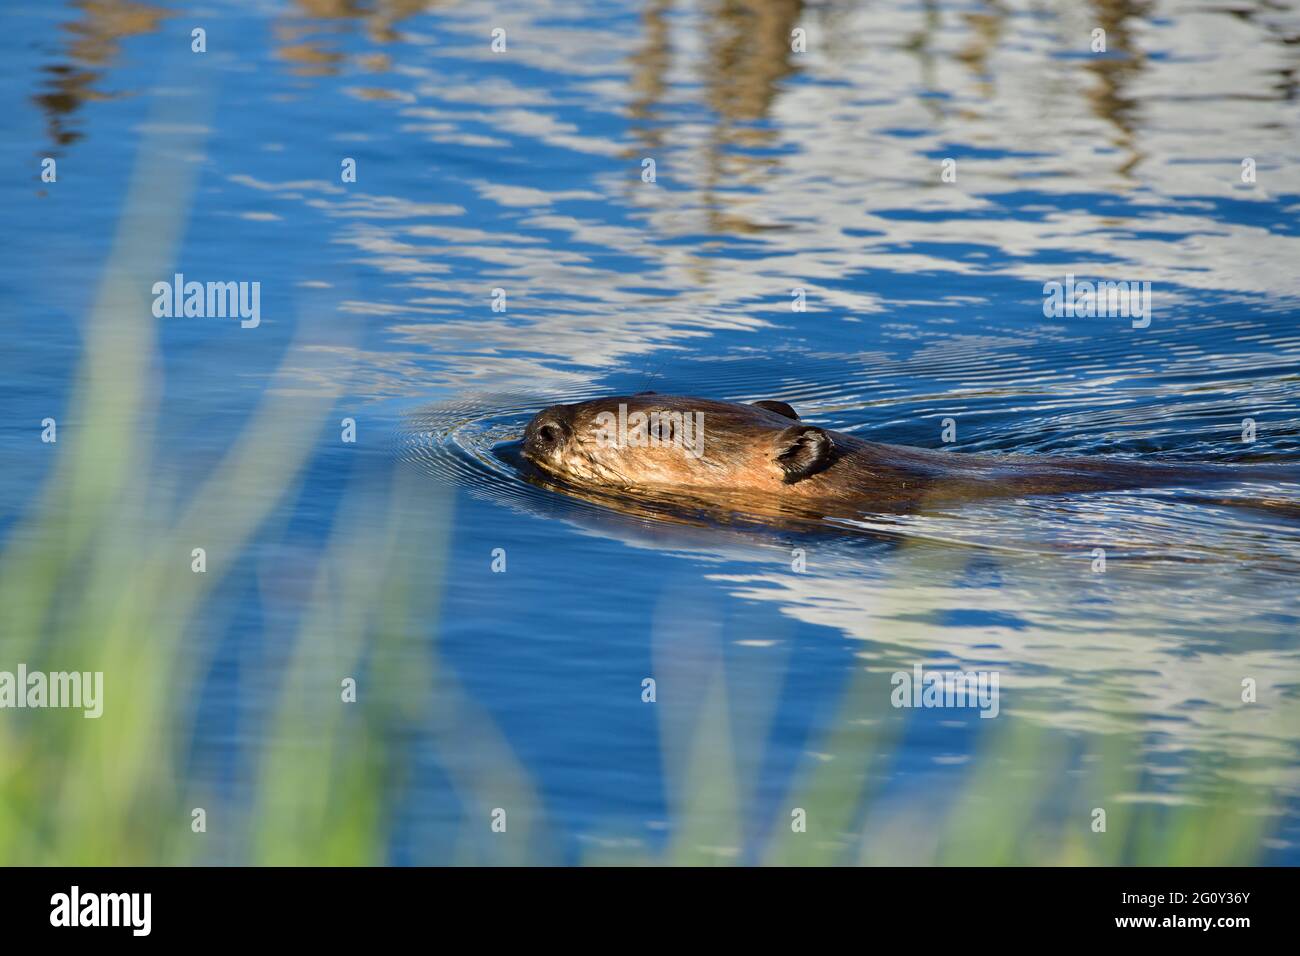 A wild Canadian Beaver "Castor canadensis", swimming in his beaver pond in rural Alberta Canada. Stock Photo